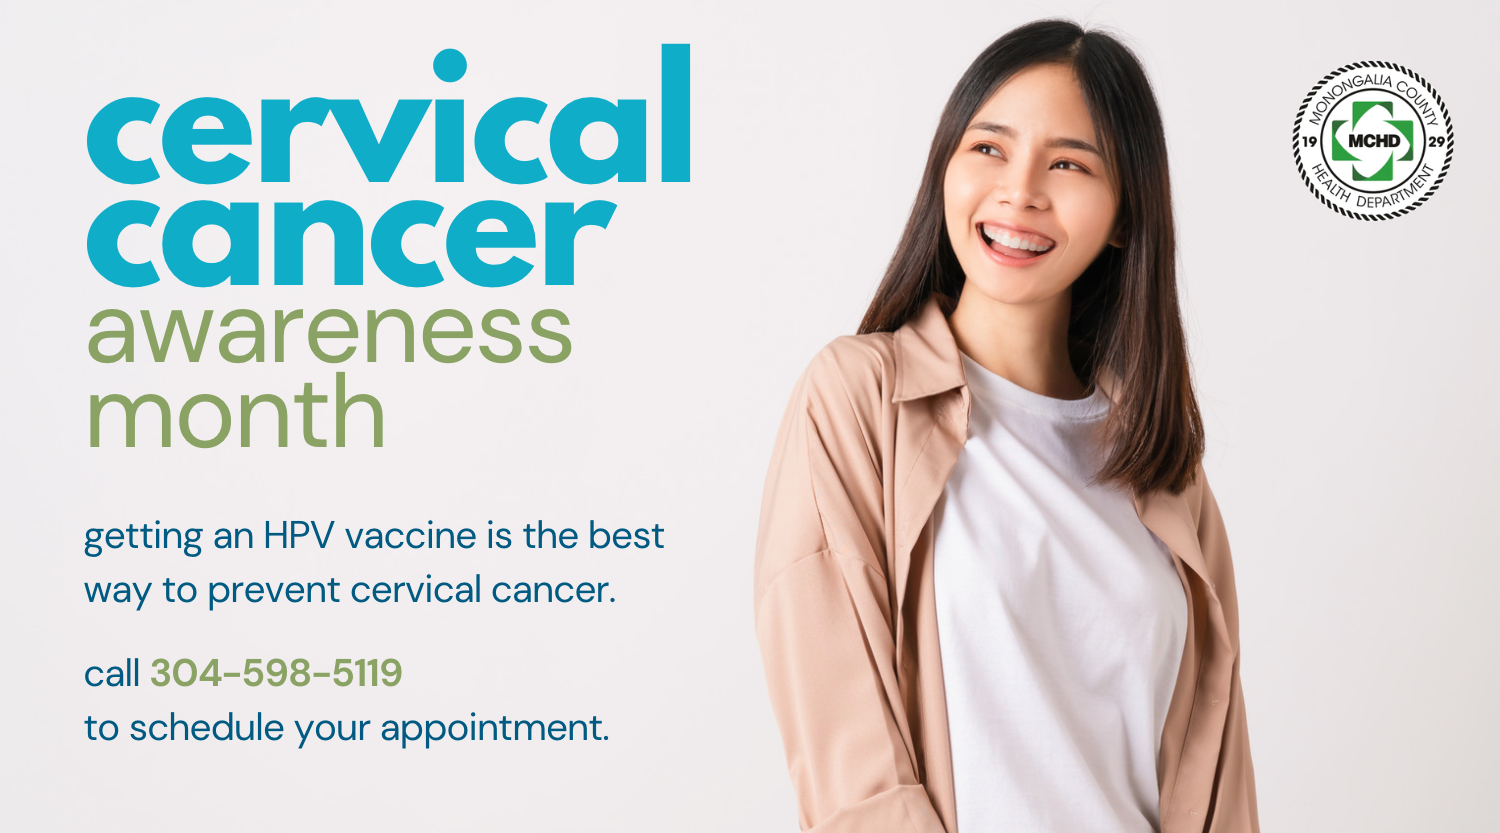 Cervical Cancer Awareness Month starts with HPV prevention